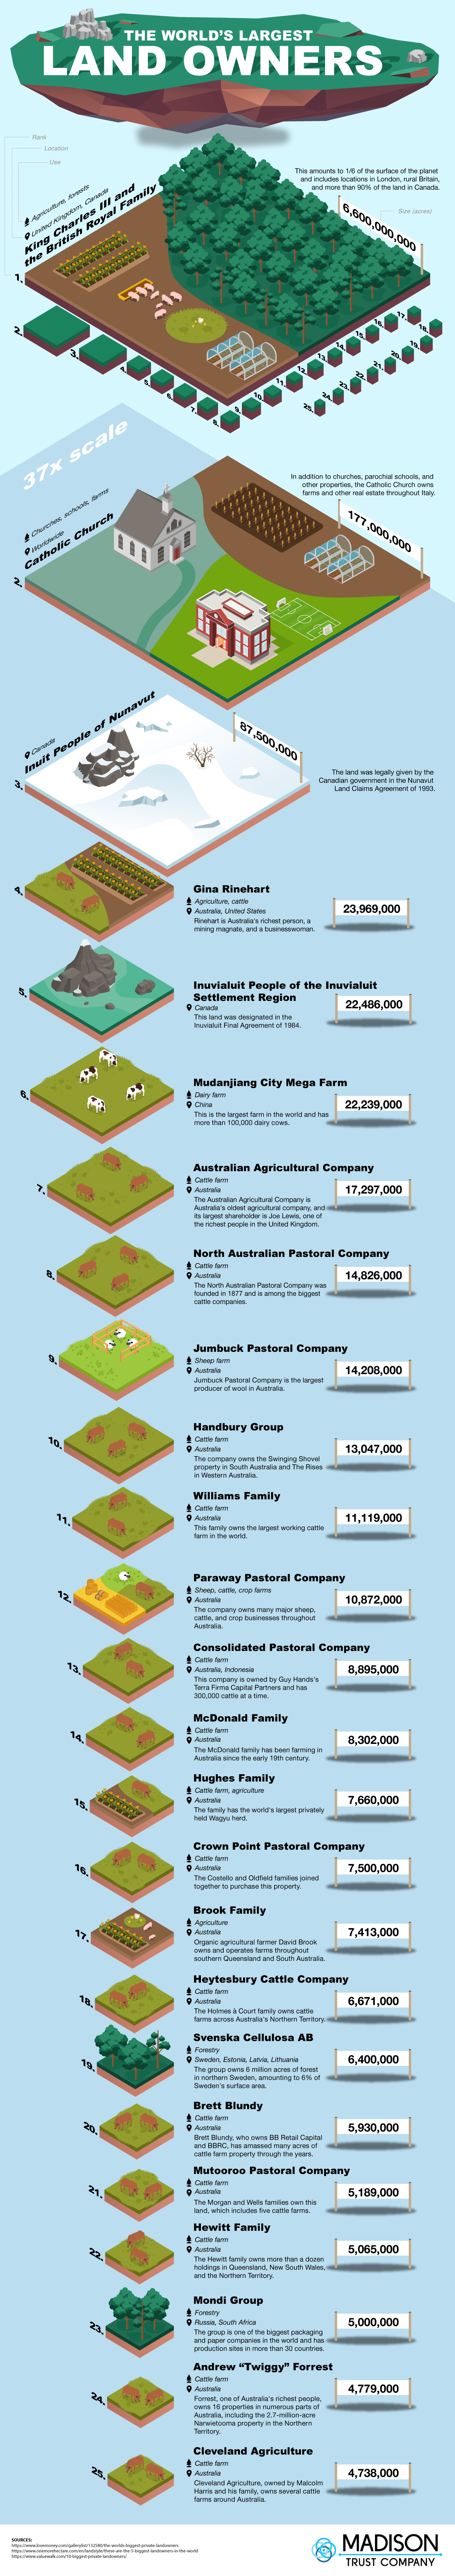 Who Owns the Most Land in the World? - MadisonTrust.com IRA - Infographic